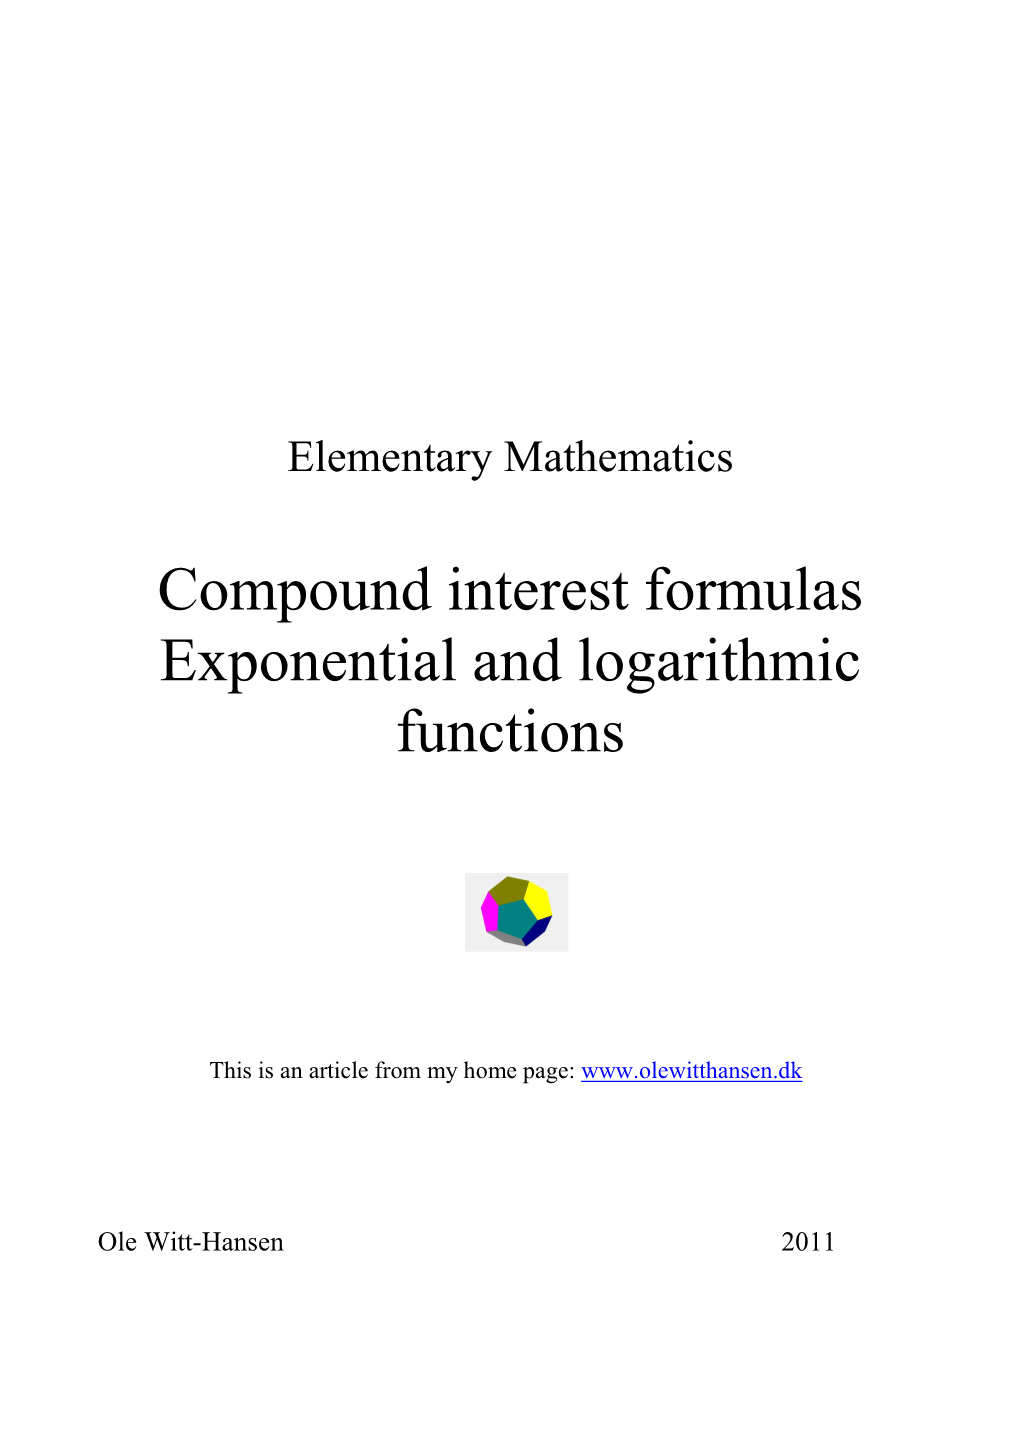 Compound Interest Formulas Exponential and Logarithmic Functions